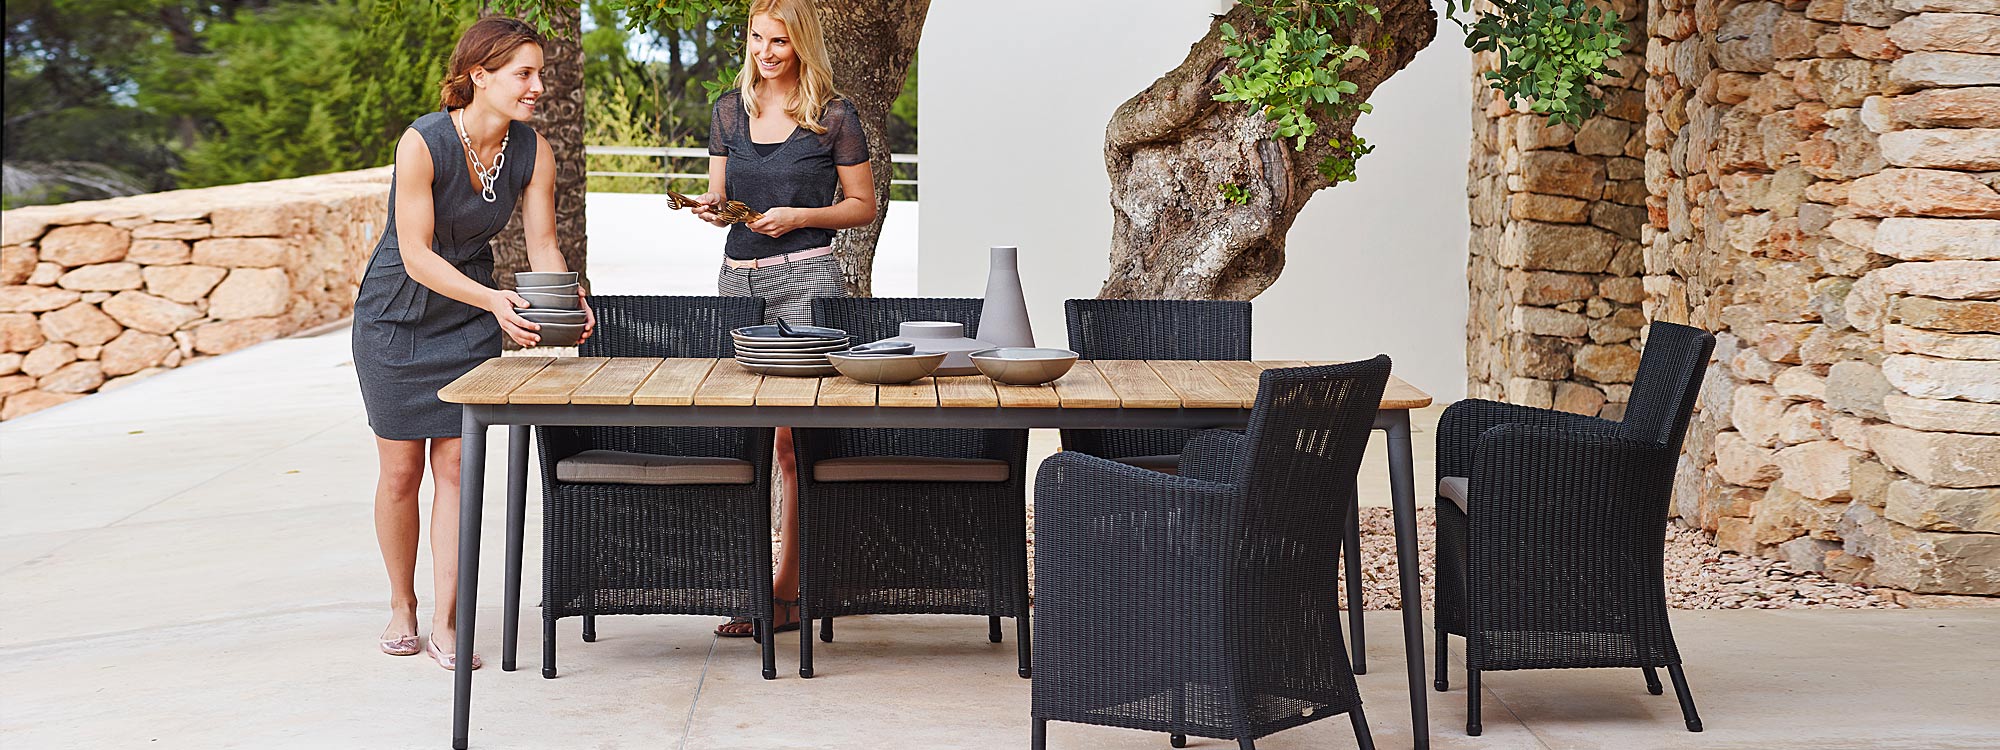 Image of Caneline Hampsted black cane garden chairs around Core garden table with Lava Grey base and teak top